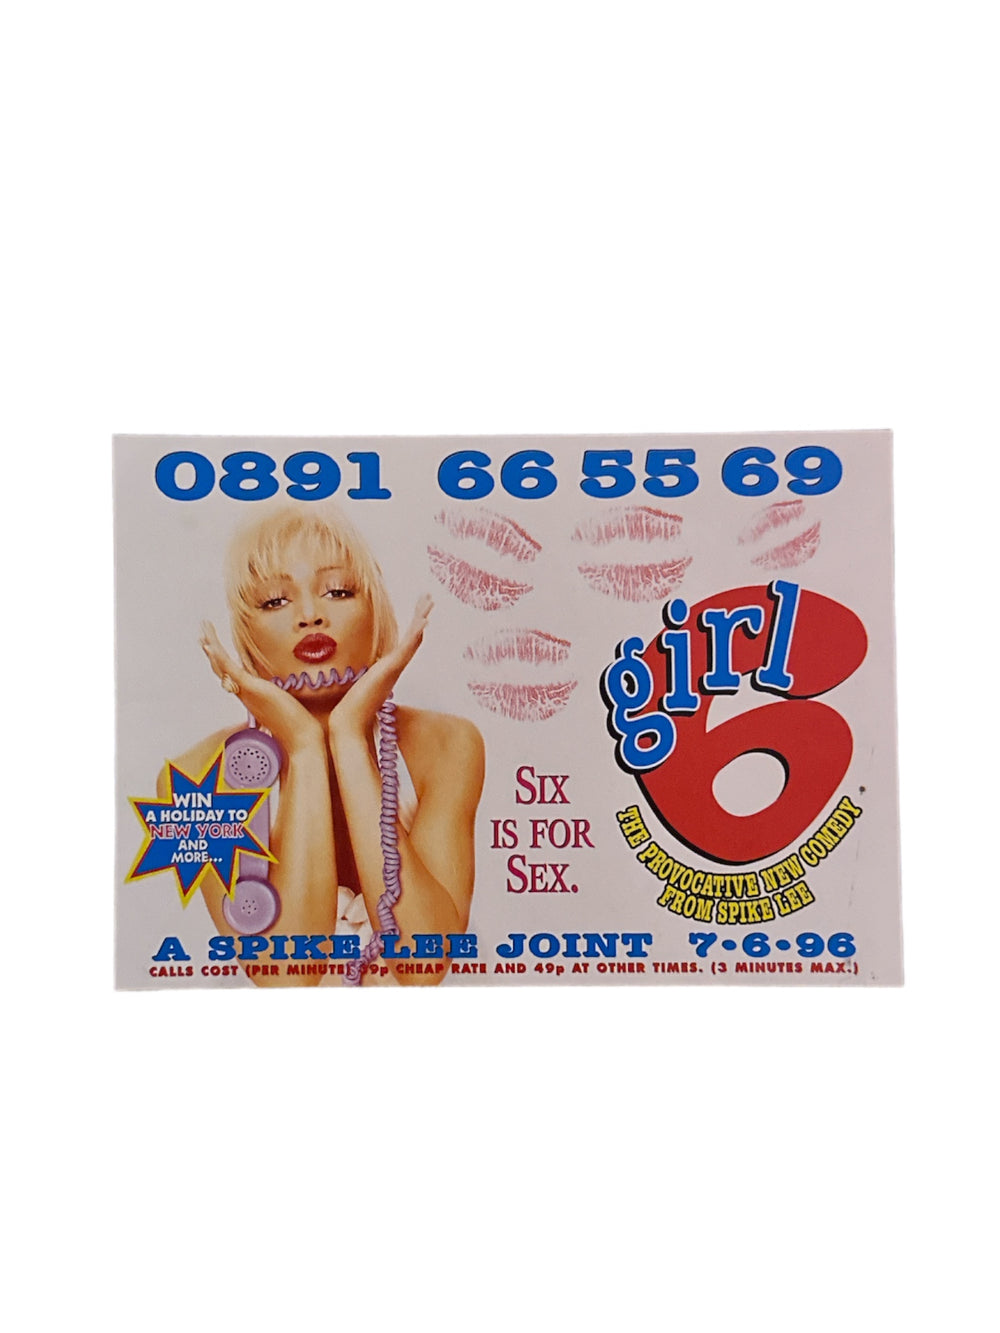 Prince – Promotional Sticker Original Girl 6 Like The Type You See In Phone Booths